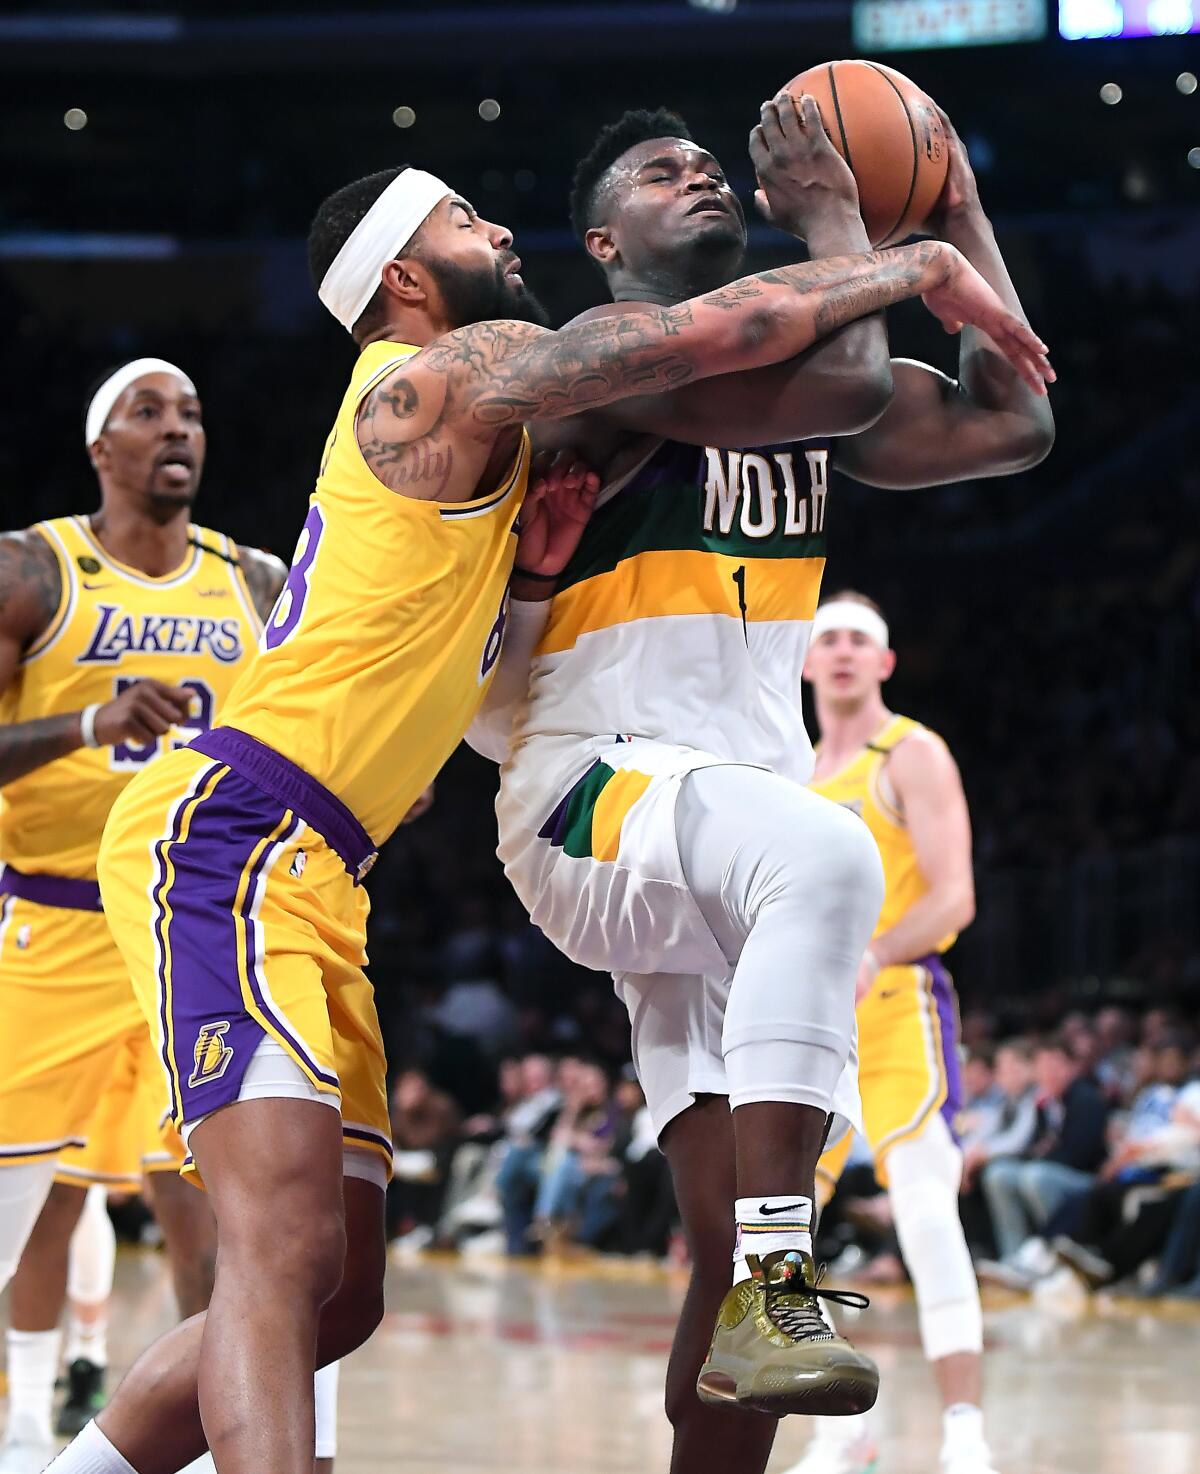 New Orleans Pelicans' Zion Williamson is fouled by Lakers' Markieff Morris while driving to the basket in the fourth quarter at Staples Center on Tuesday. 